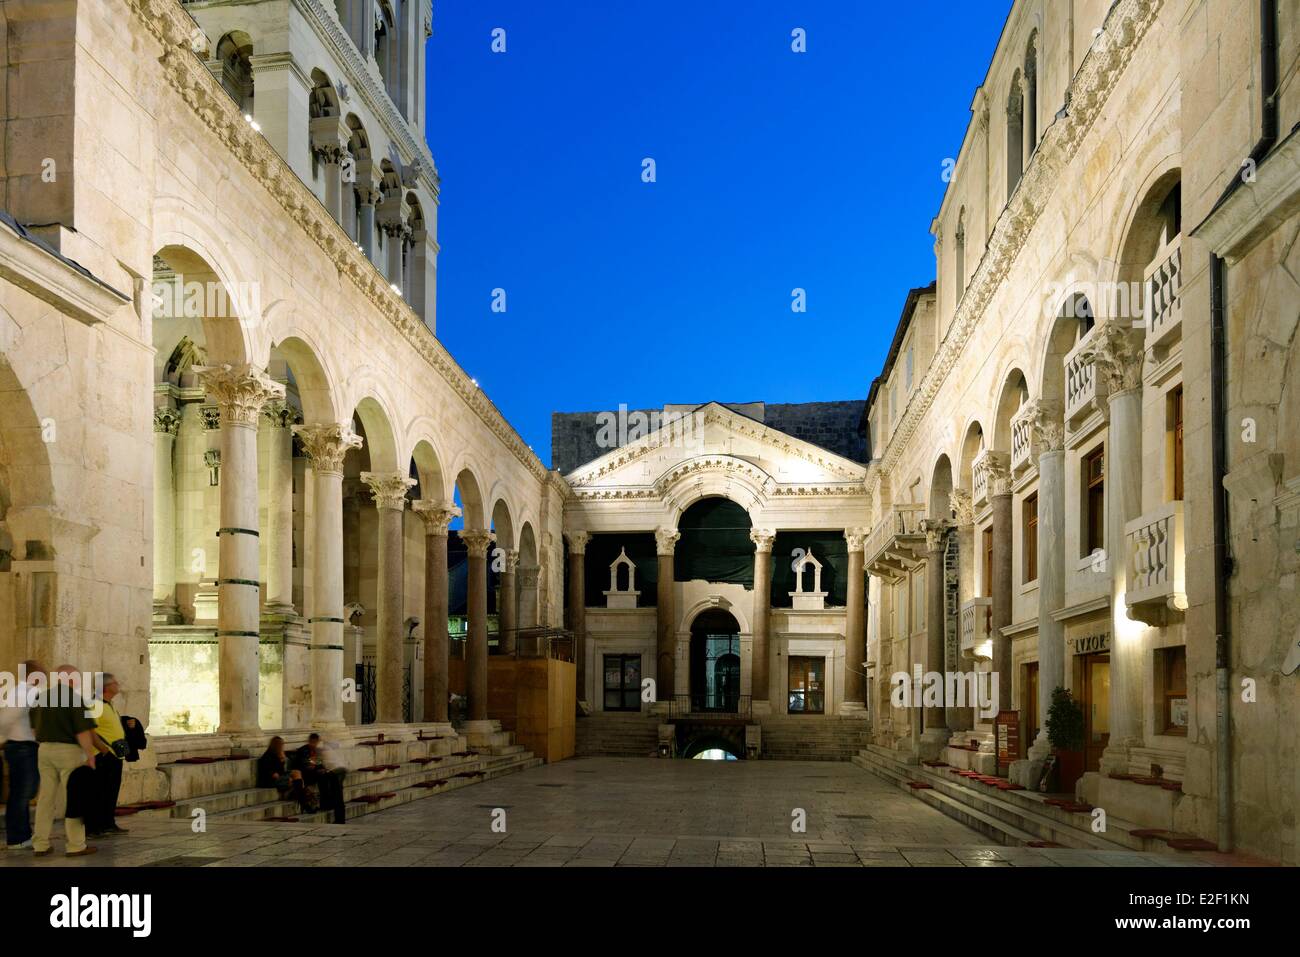 Croatia Dalmatian coast Split old Roman city listed as World Heritage by UNESCO Diocletian's palace Peristyle and the Cafe Luxor Stock Photo